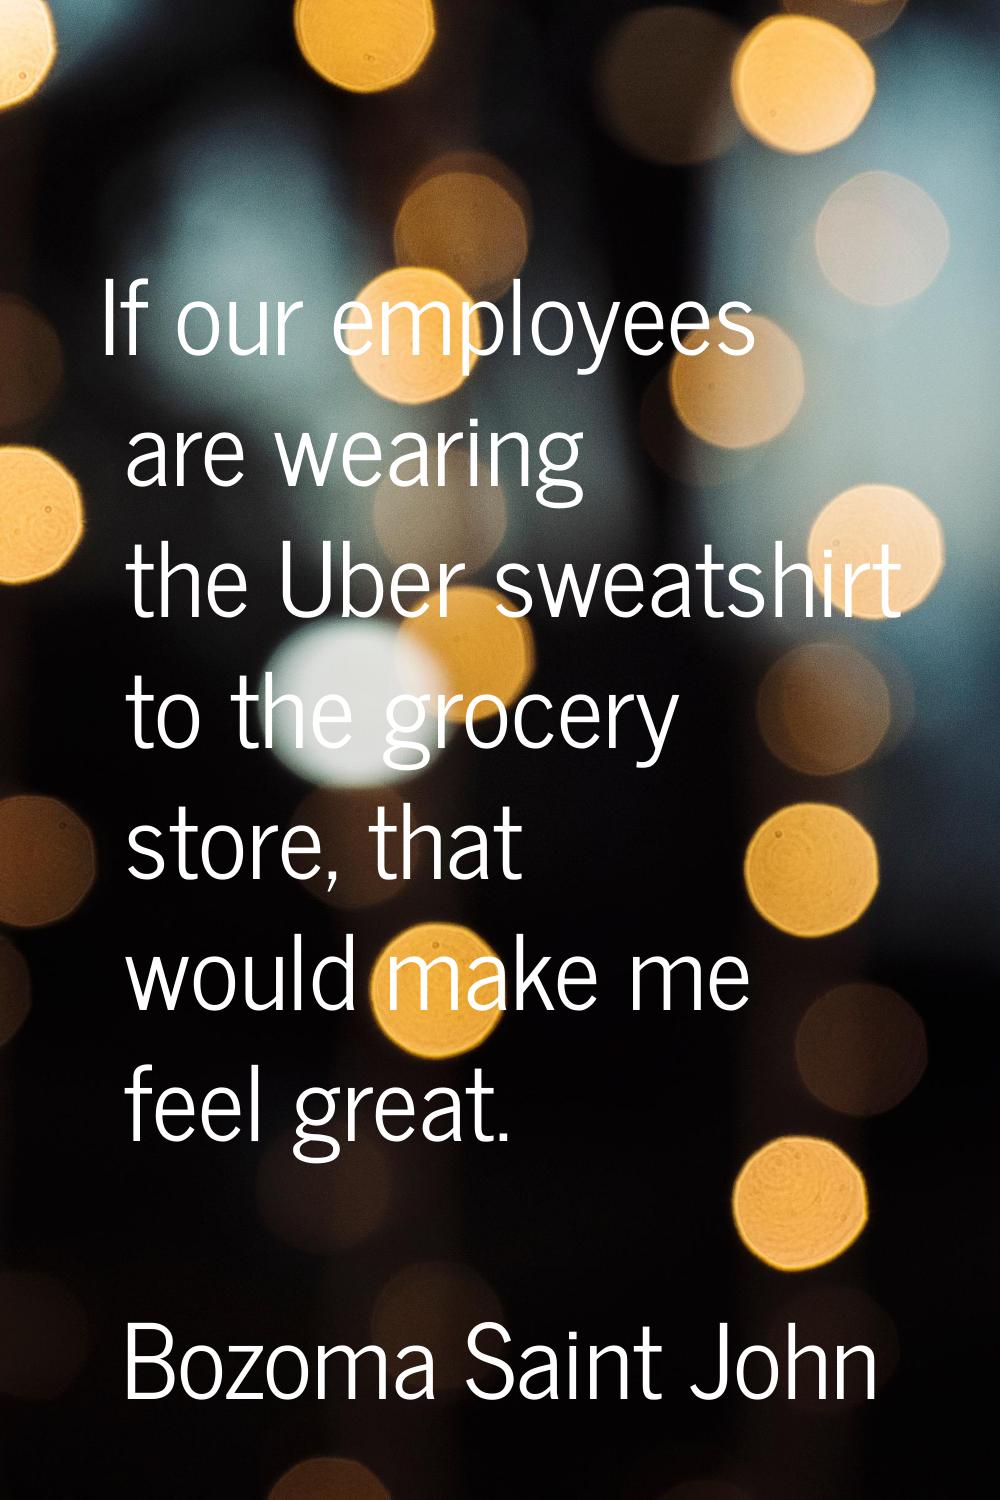 If our employees are wearing the Uber sweatshirt to the grocery store, that would make me feel grea